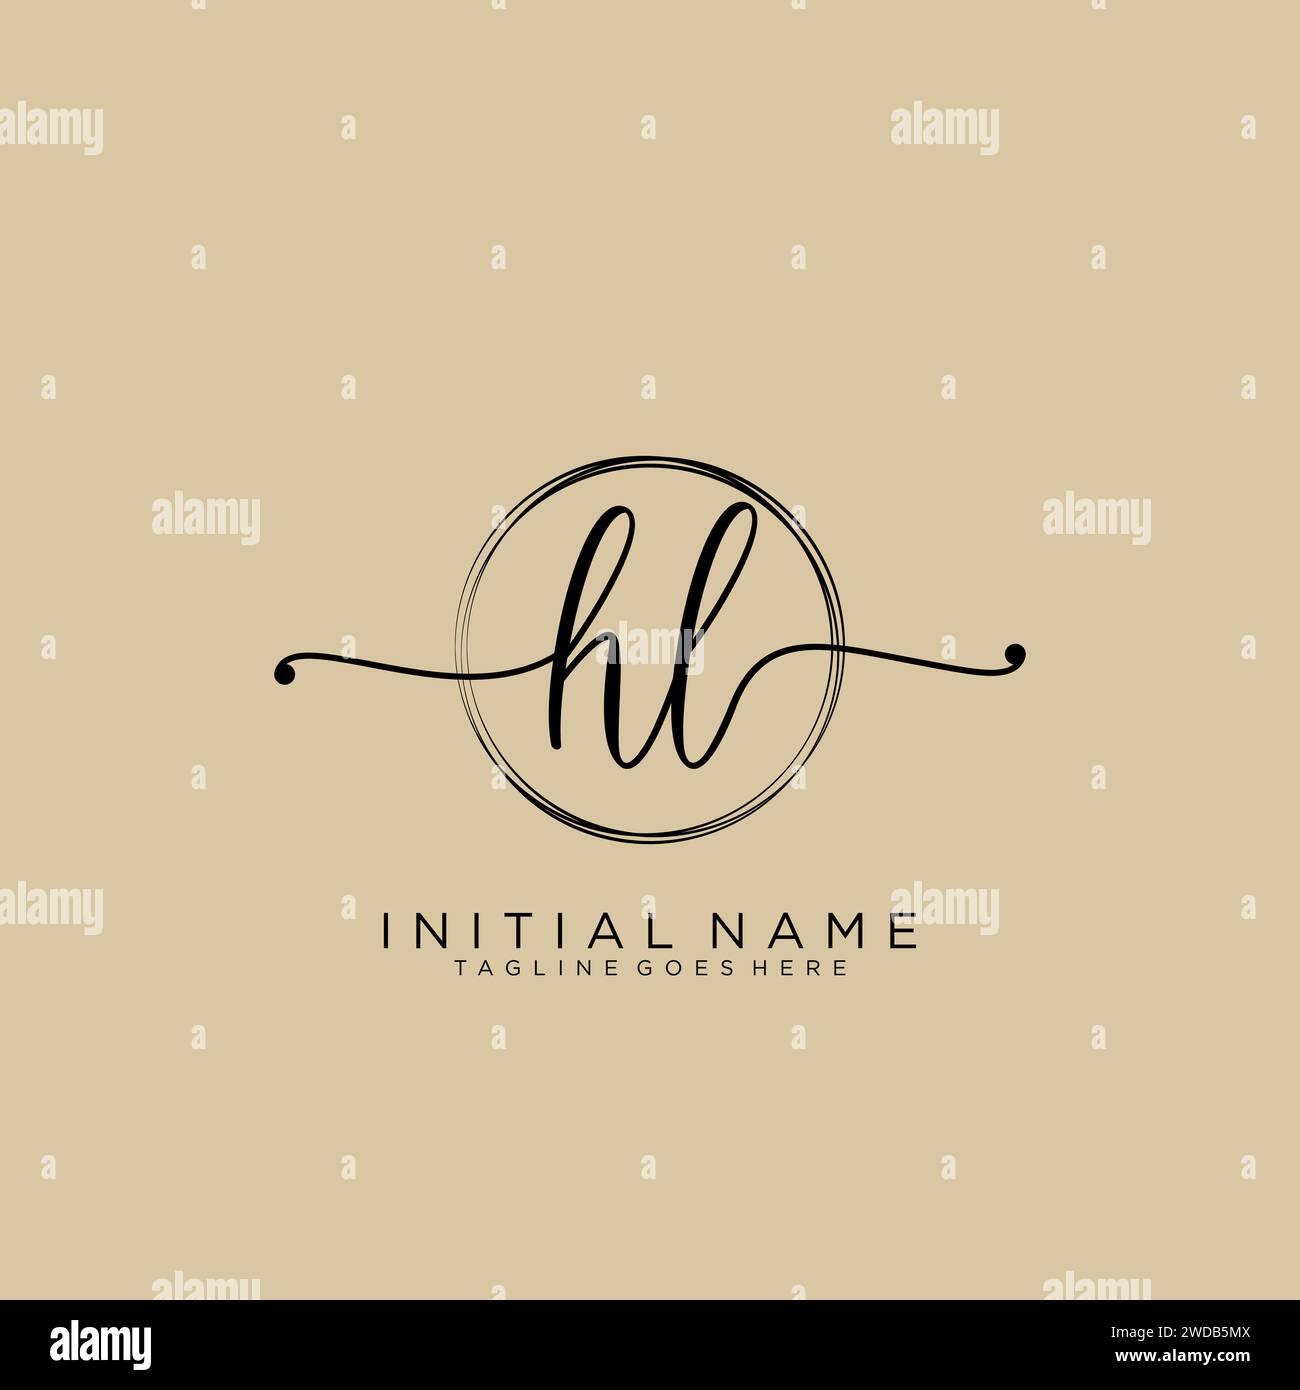 HL Initial handwriting logo with circle Stock Vector